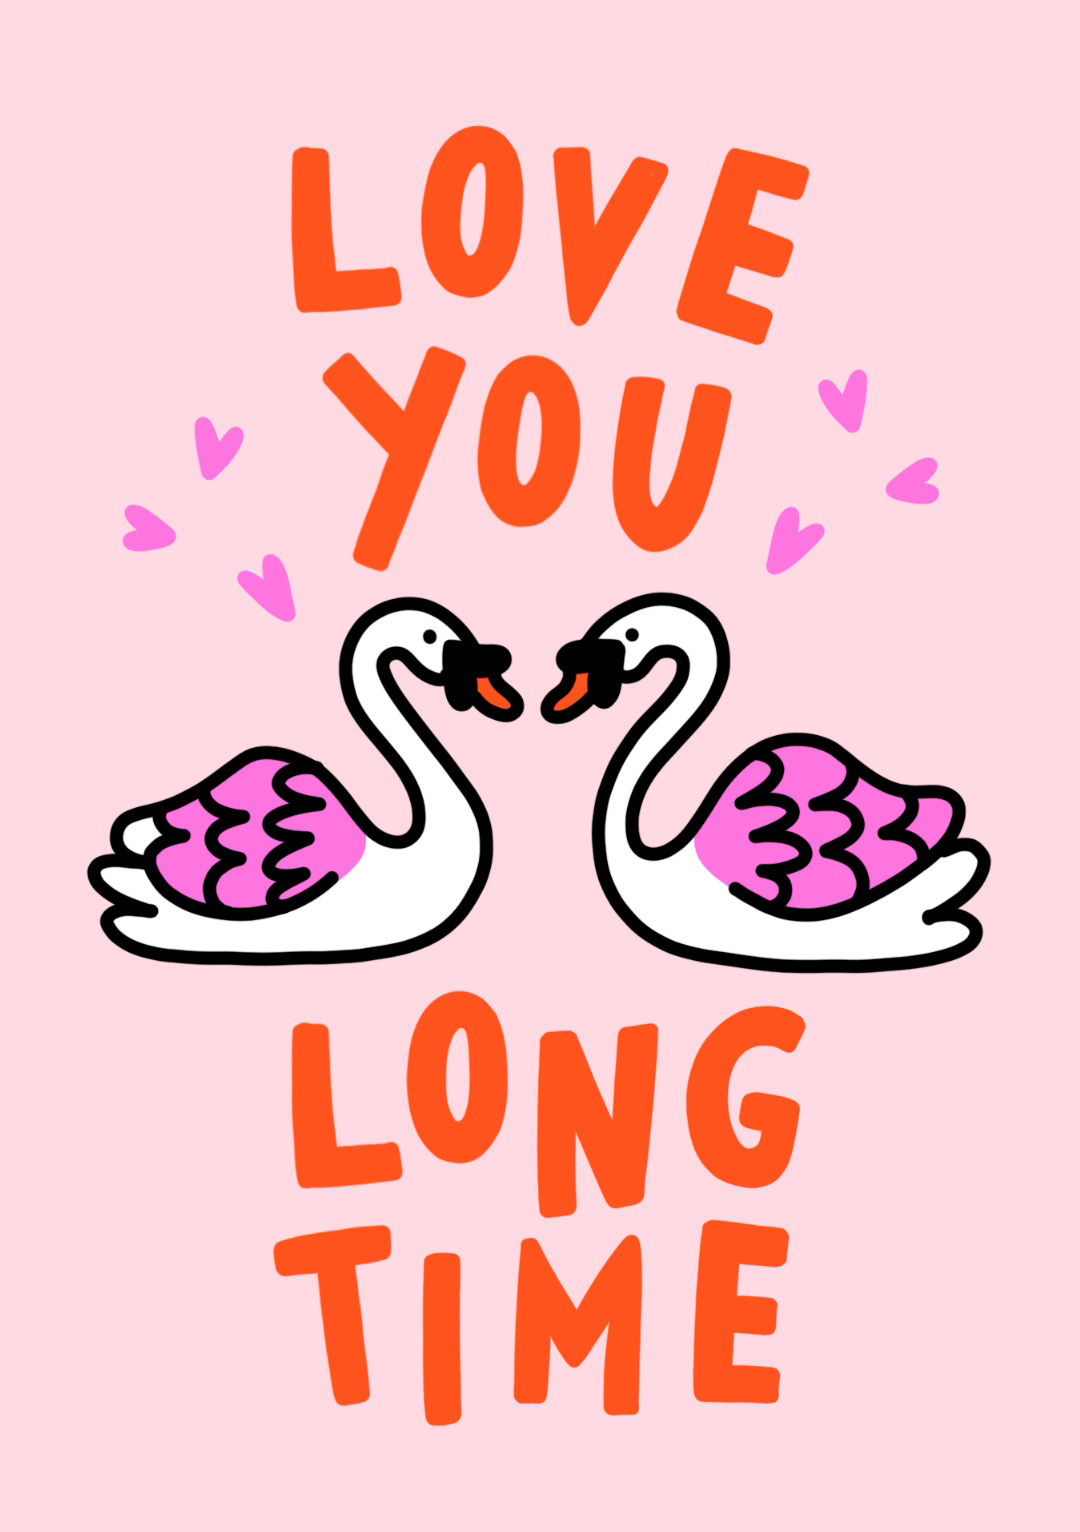 Love You Long Time - Valentine's Day CardLove You Long Time - Valentine's Day Card